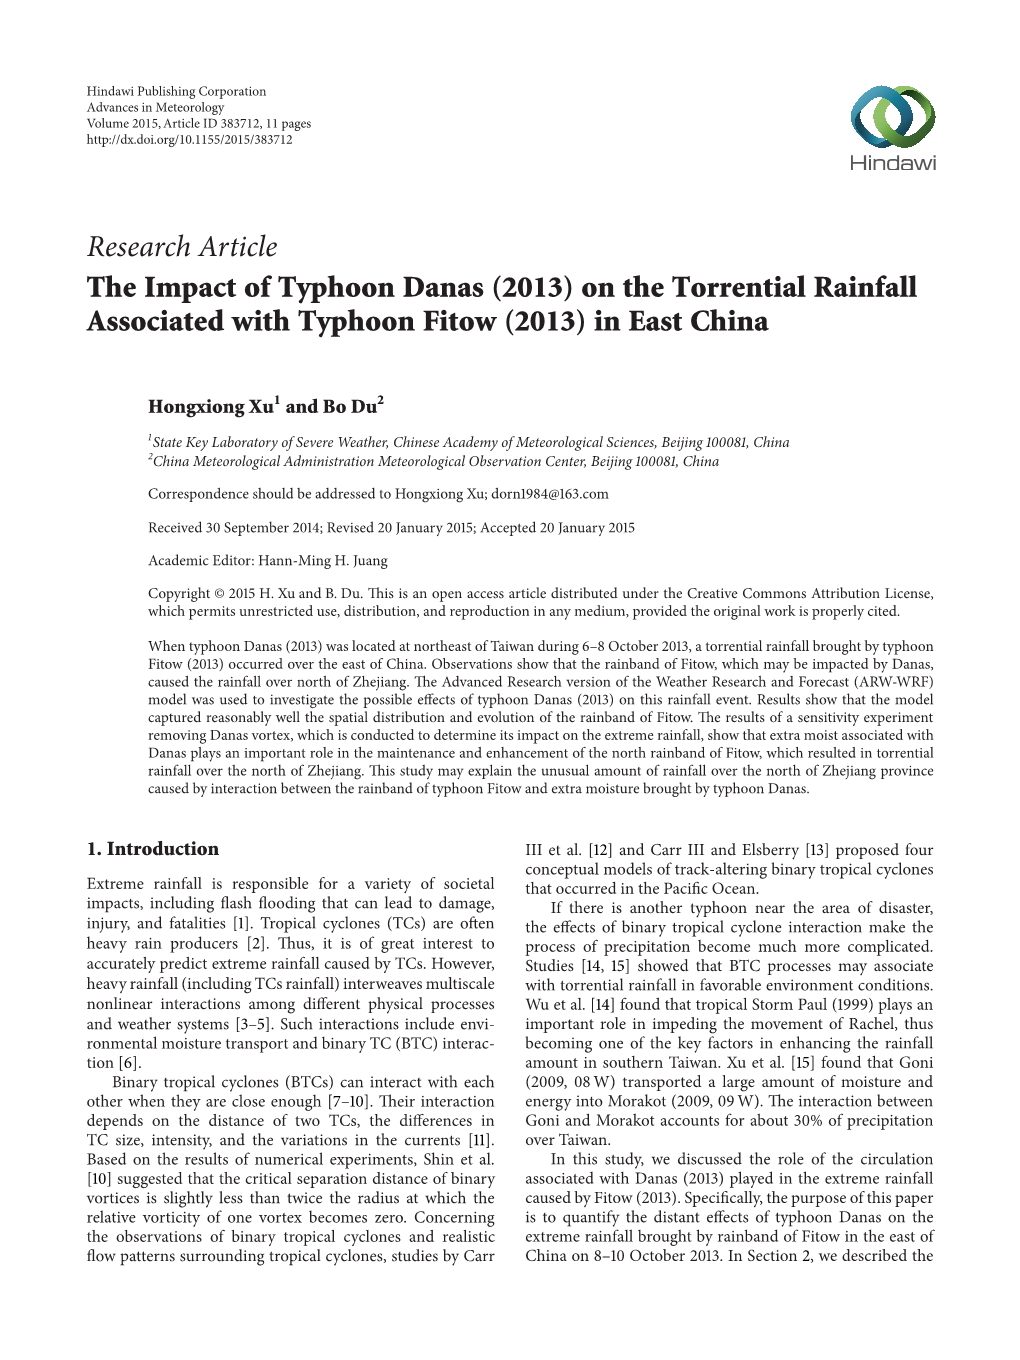 The Impact of Typhoon Danas (2013) on the Torrential Rainfall Associated with Typhoon Fitow (2013) in East China